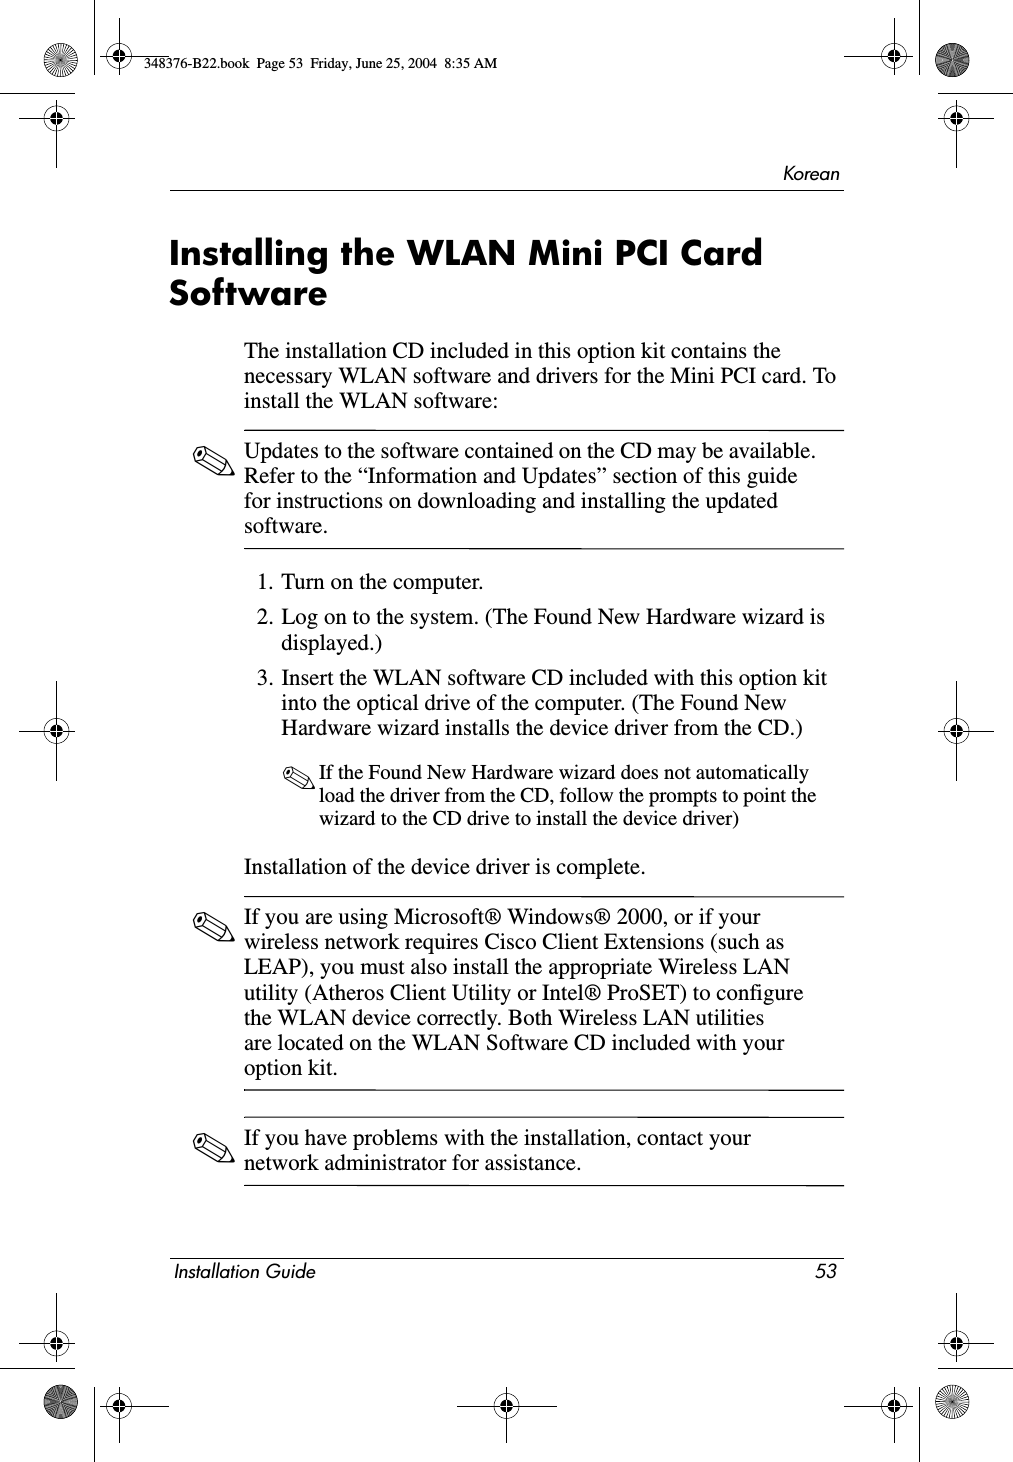 KoreanInstallation Guide 53Installing the WLAN Mini PCI Card SoftwareThe installation CD included in this option kit contains the necessary WLAN software and drivers for the Mini PCI card. To install the WLAN software: ✎Updates to the software contained on the CD may be available. Refer to the “Information and Updates” section of this guide for instructions on downloading and installing the updated software.1. Turn on the computer.2. Log on to the system. (The Found New Hardware wizard is displayed.)3. Insert the WLAN software CD included with this option kit into the optical drive of the computer. (The Found New Hardware wizard installs the device driver from the CD.)✎If the Found New Hardware wizard does not automatically load the driver from the CD, follow the prompts to point the wizard to the CD drive to install the device driver)Installation of the device driver is complete.✎If you are using Microsoft® Windows® 2000, or if your wireless network requires Cisco Client Extensions (such as LEAP), you must also install the appropriate Wireless LAN utility (Atheros Client Utility or Intel® ProSET) to configure the WLAN device correctly. Both Wireless LAN utilities are located on the WLAN Software CD included with your option kit. ✎If you have problems with the installation, contact your network administrator for assistance.348376-B22.book  Page 53  Friday, June 25, 2004  8:35 AM